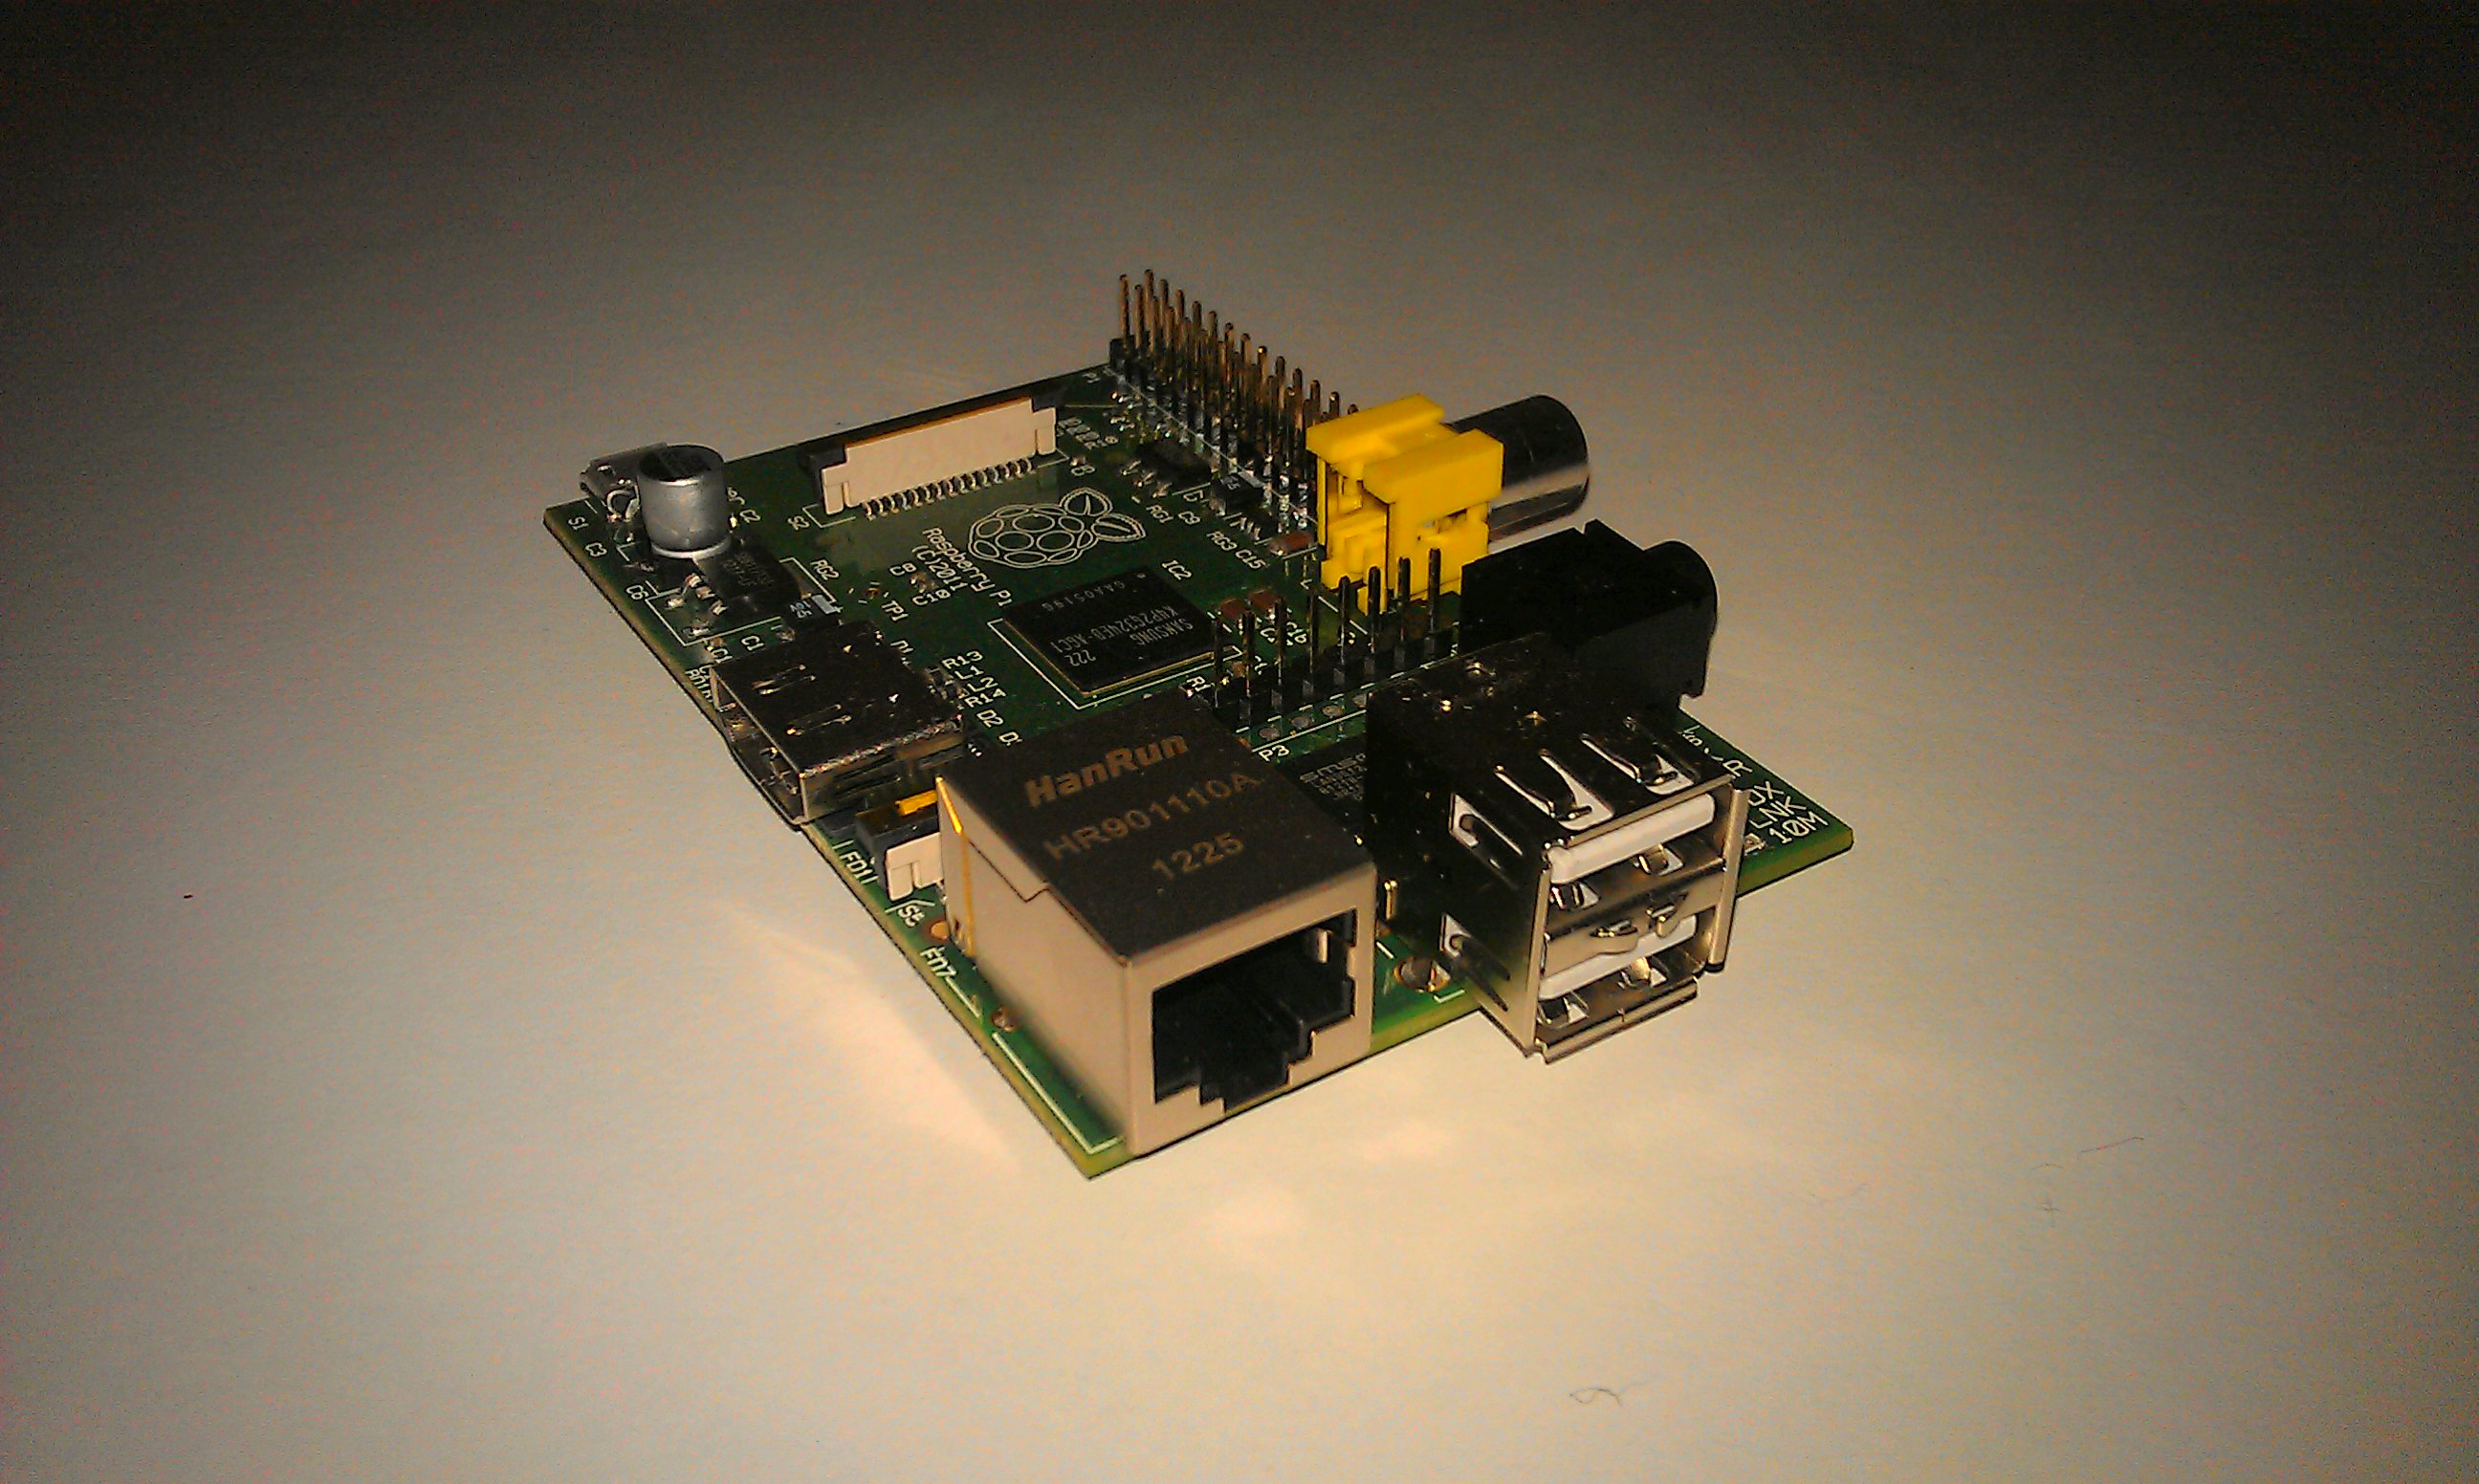 Overclock your Raspberry Pi - Squeeze more power out of your $35 computer